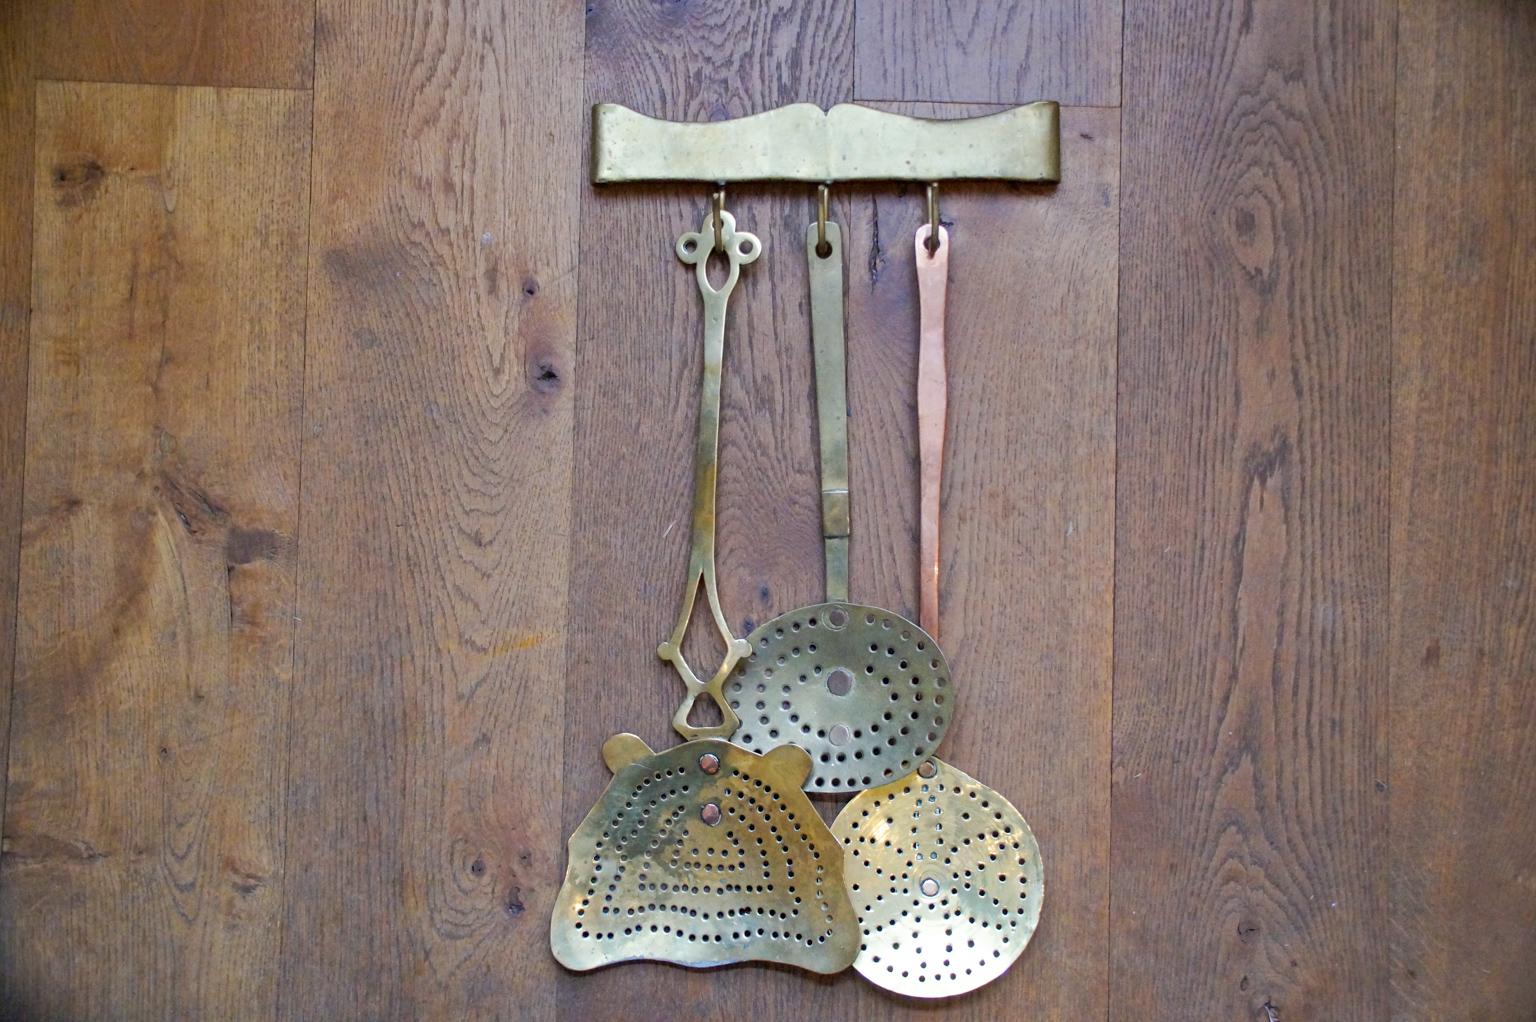 18th-19th century Dutch Louis XV fireplace tool set consisting of a hanger and three different skimmers. Two skimmers are made of brass entirely and one skimmer is made of brass with a copper handle. The tool set is in a good condition and is fully